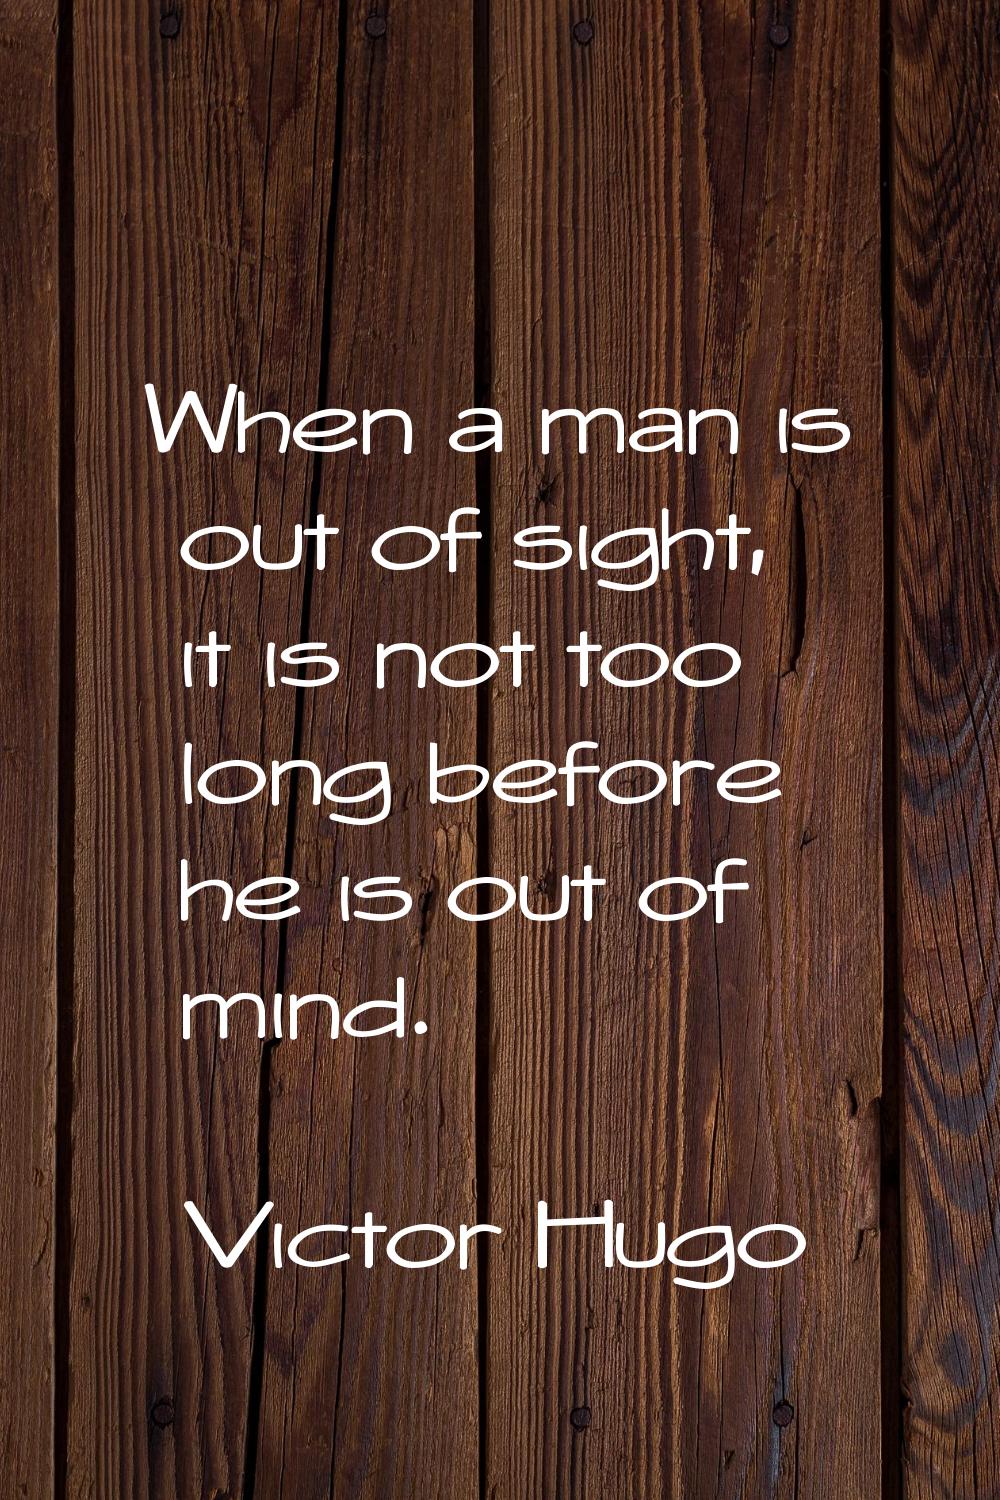 When a man is out of sight, it is not too long before he is out of mind.